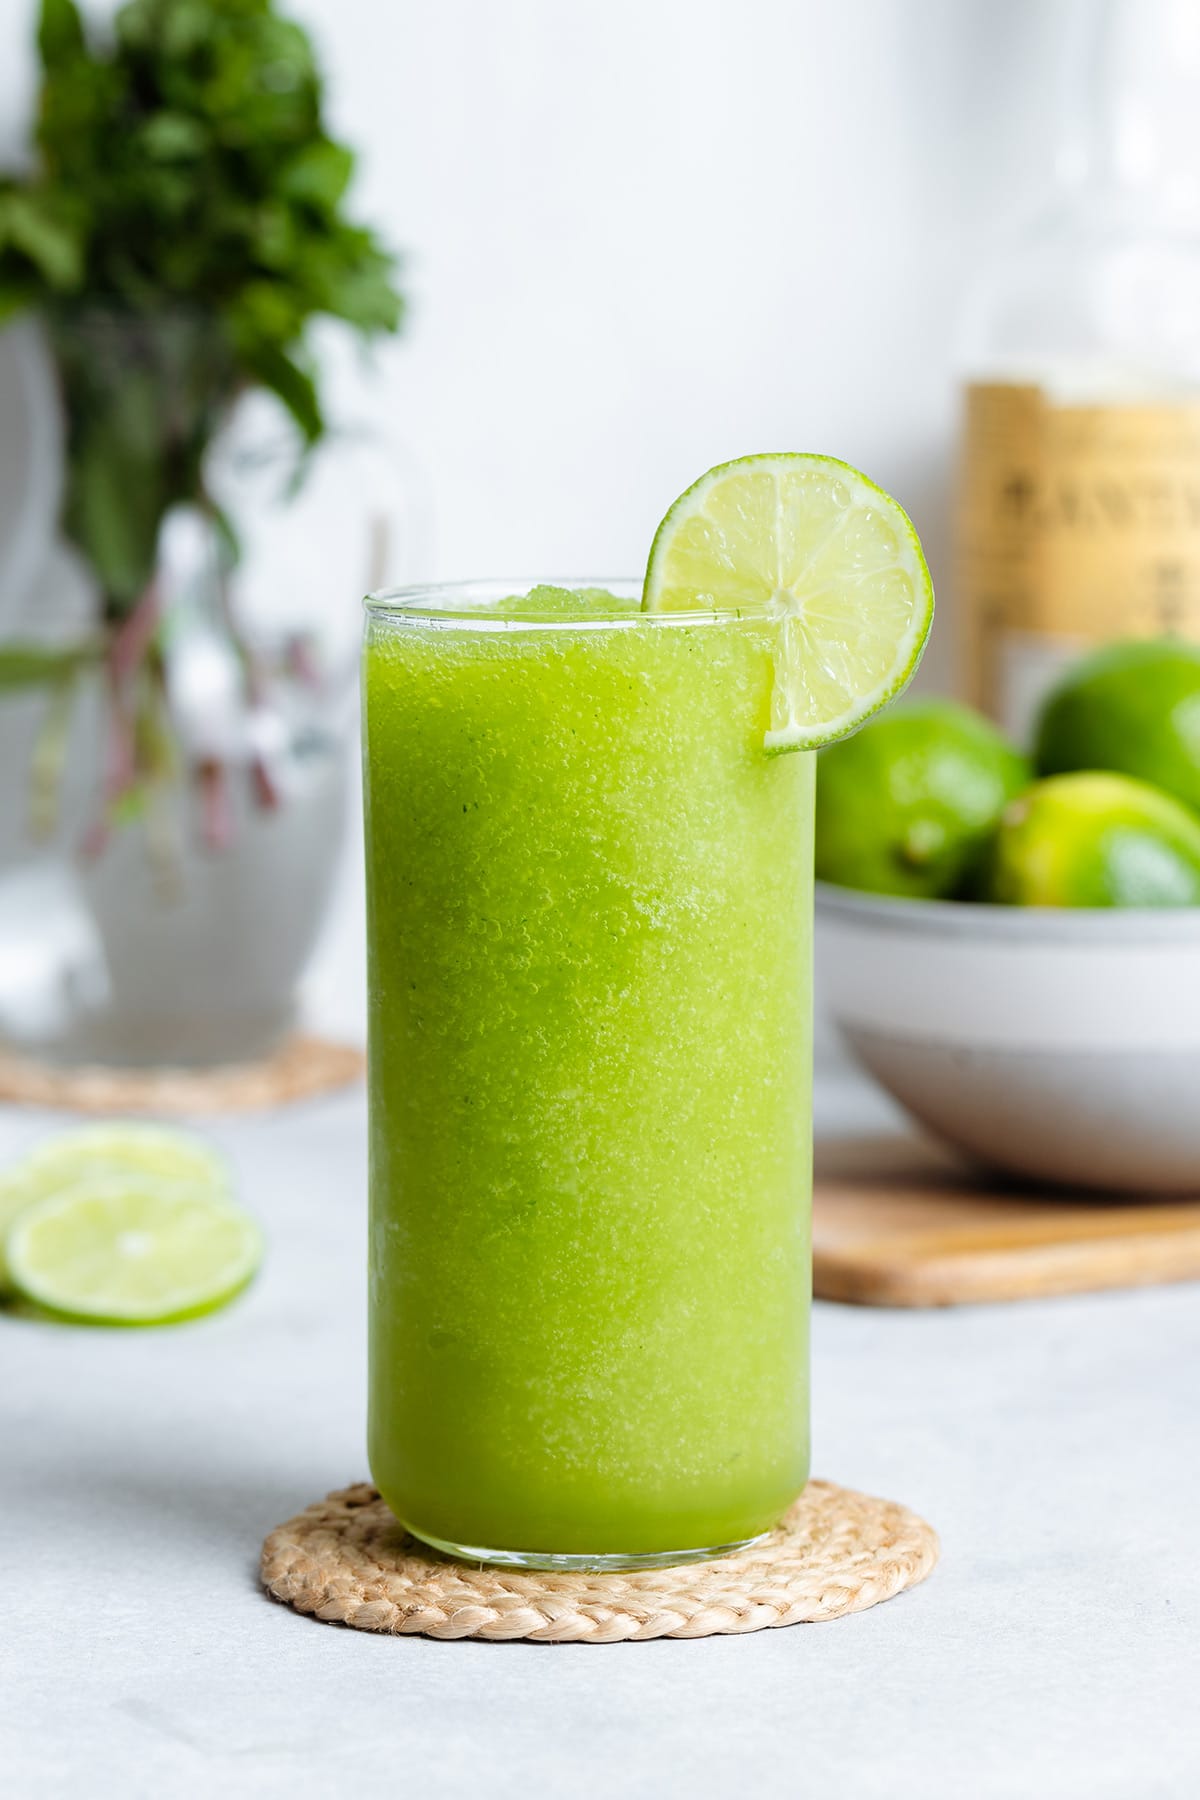 Blended mojito in a tall glass garnished with a slice of lime.